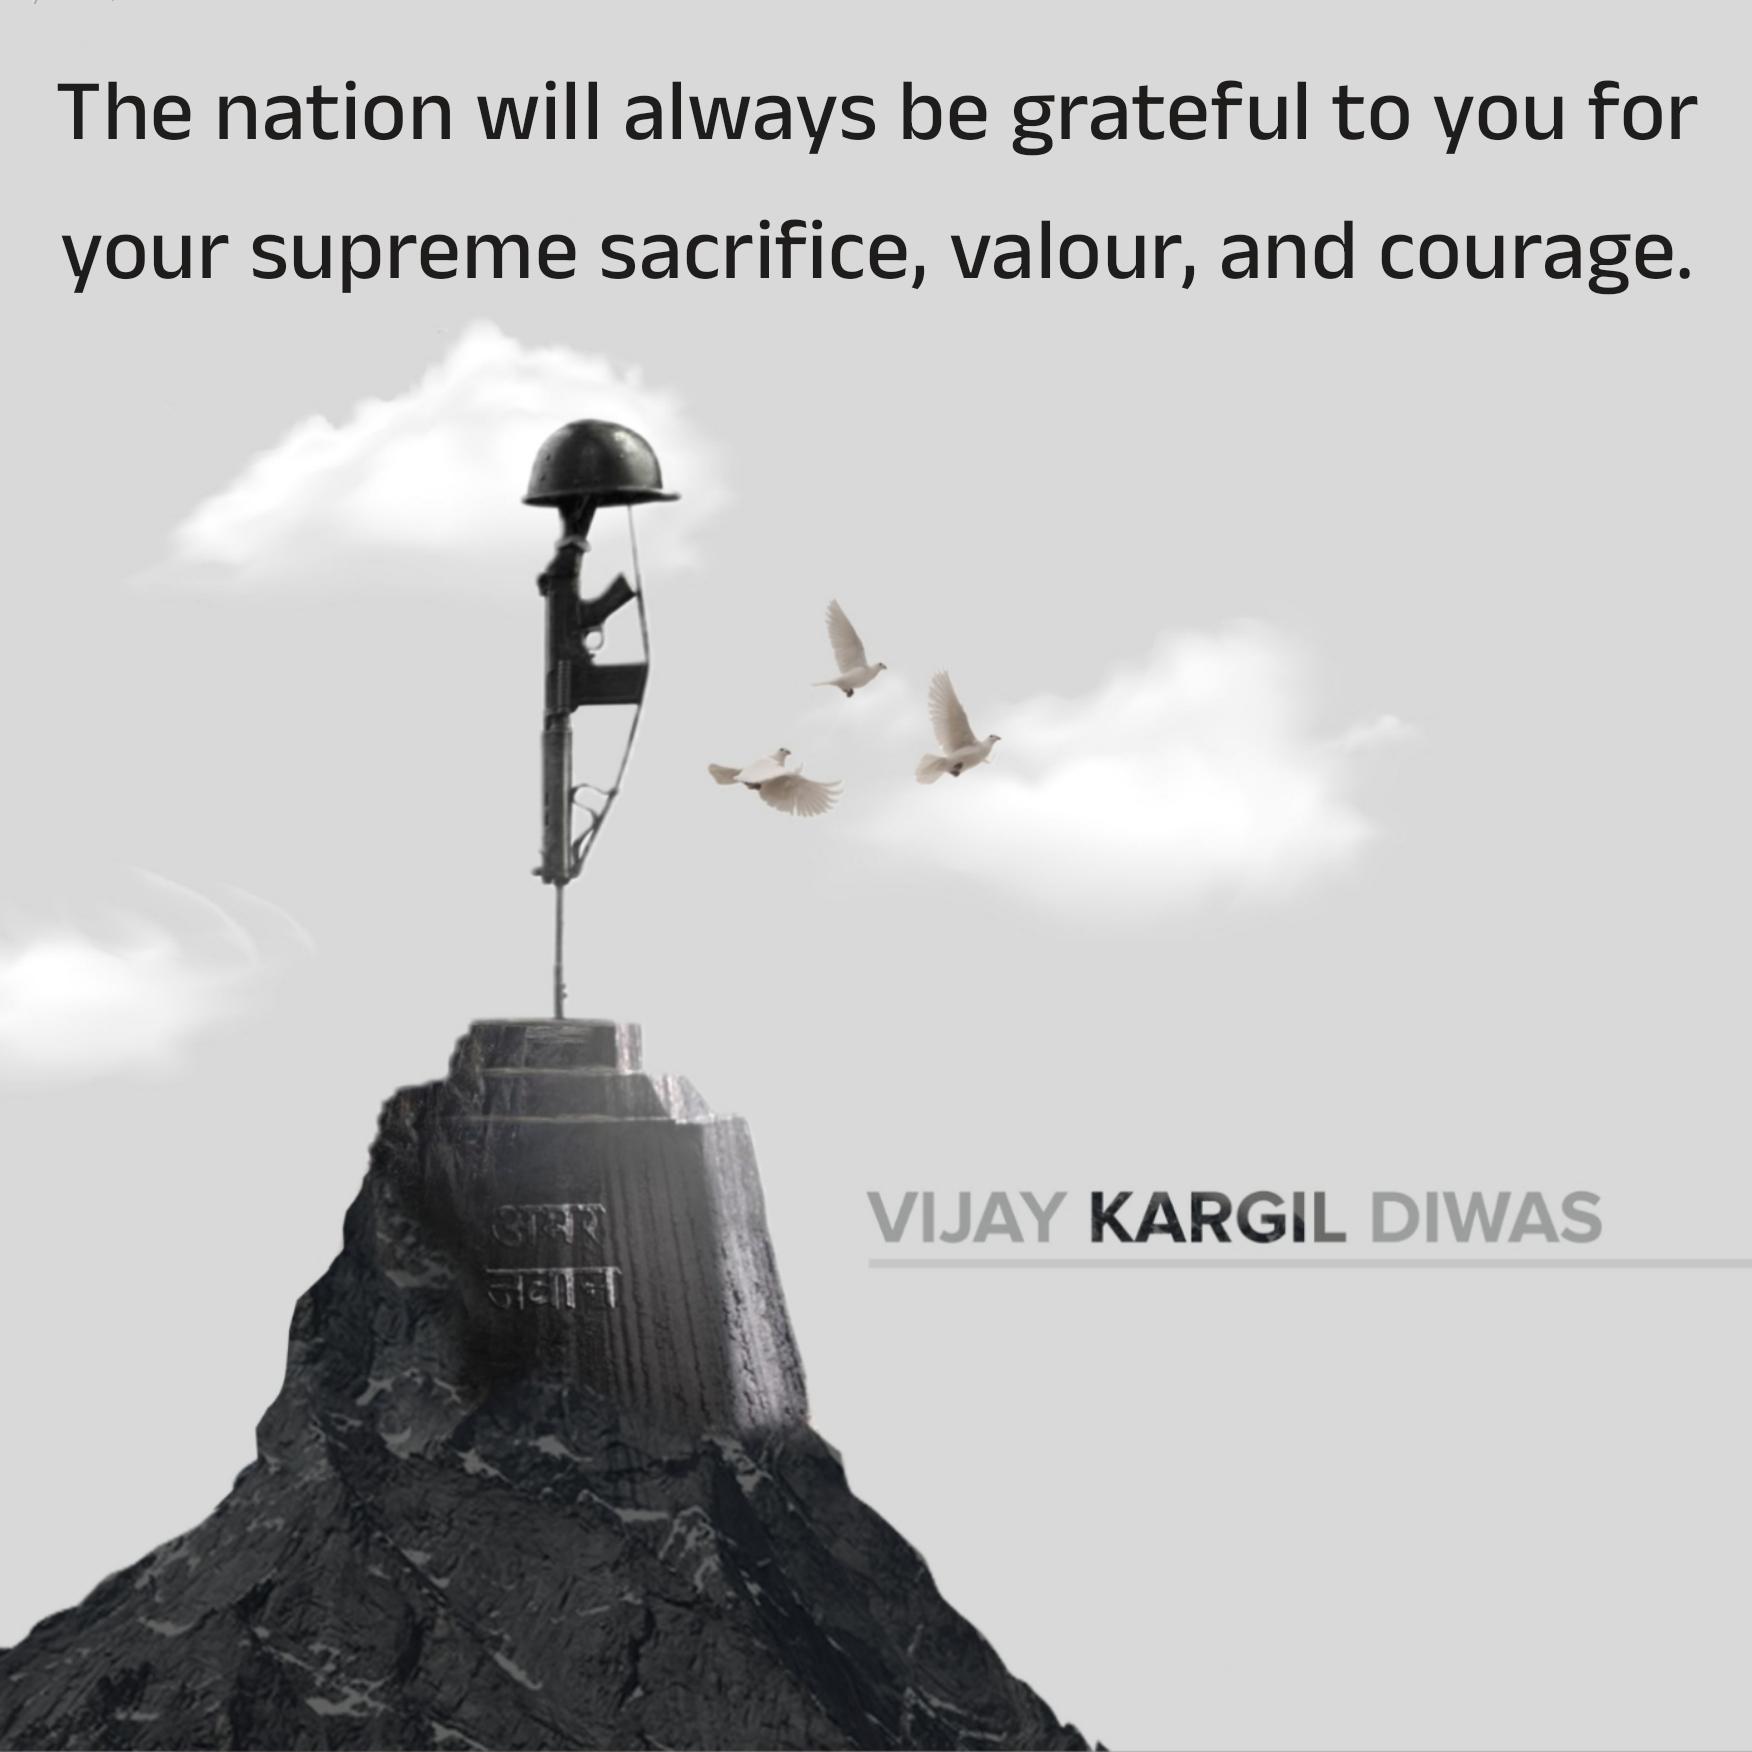 The nation will always be grateful to you for your supreme sacrifice